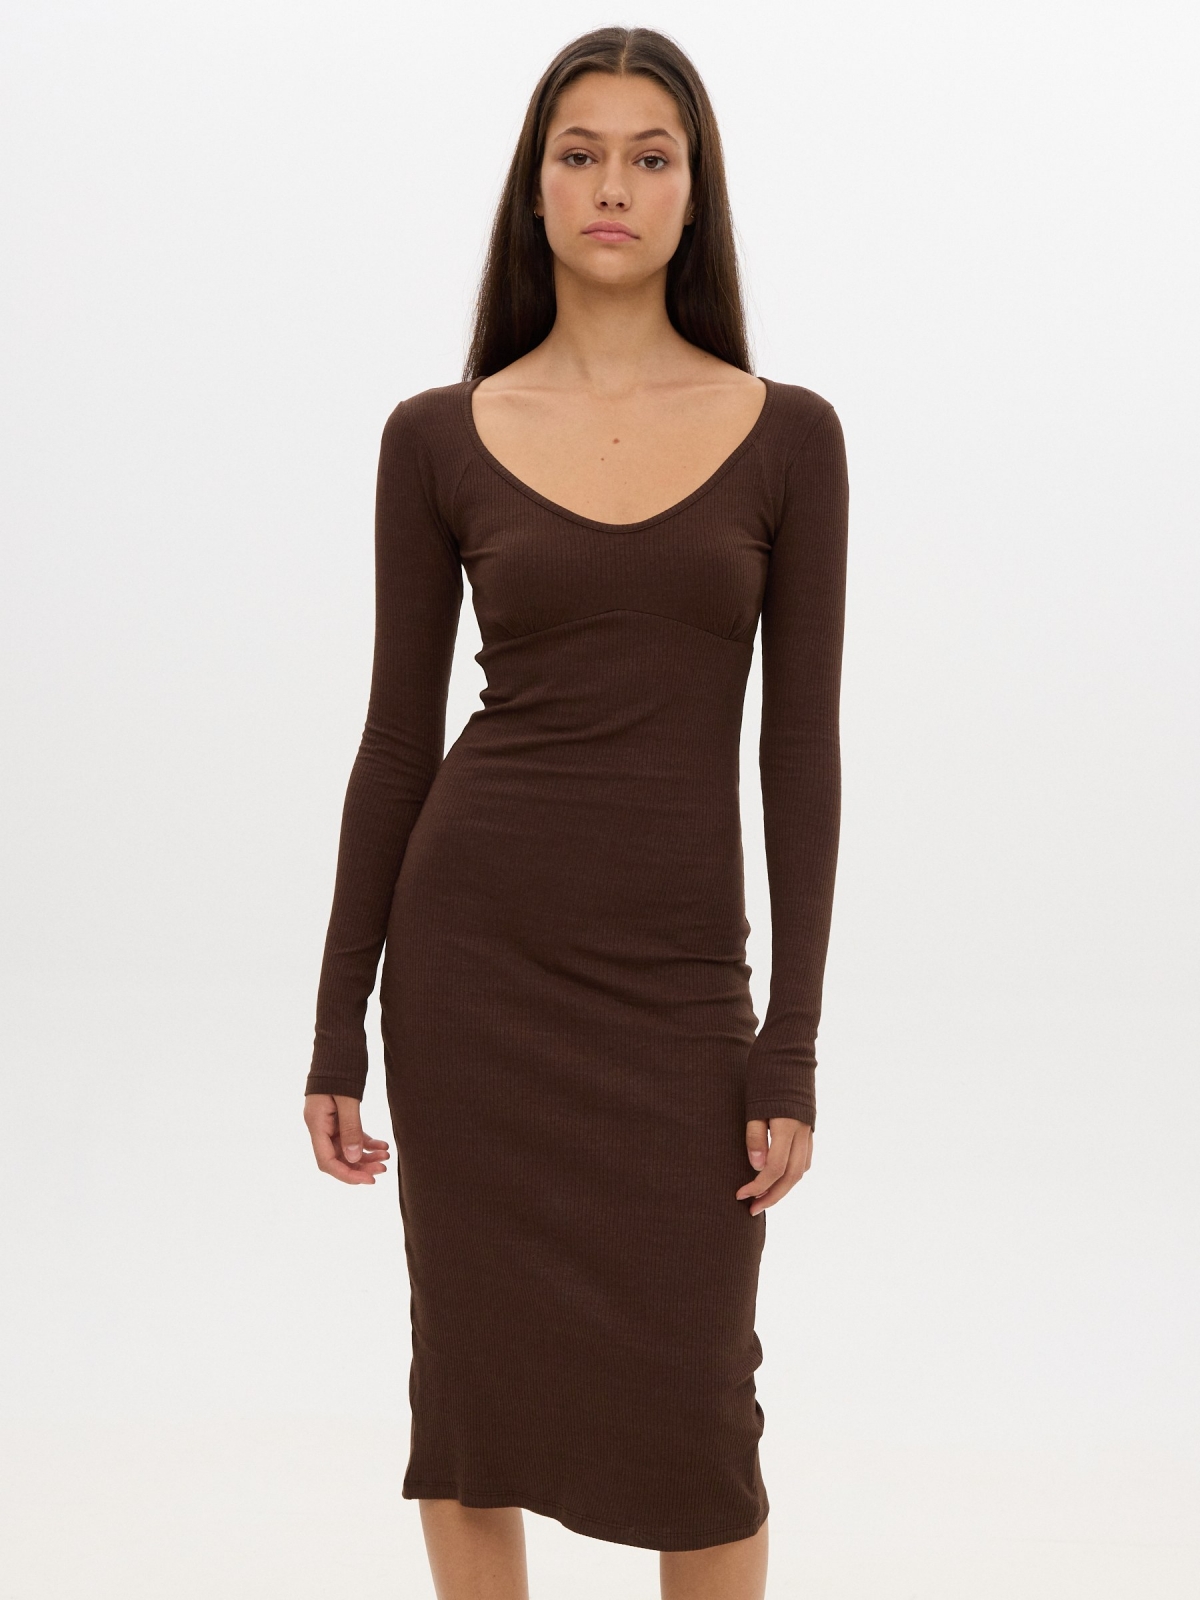 Chocolate dress with sweetheart neckline chocolate middle front view